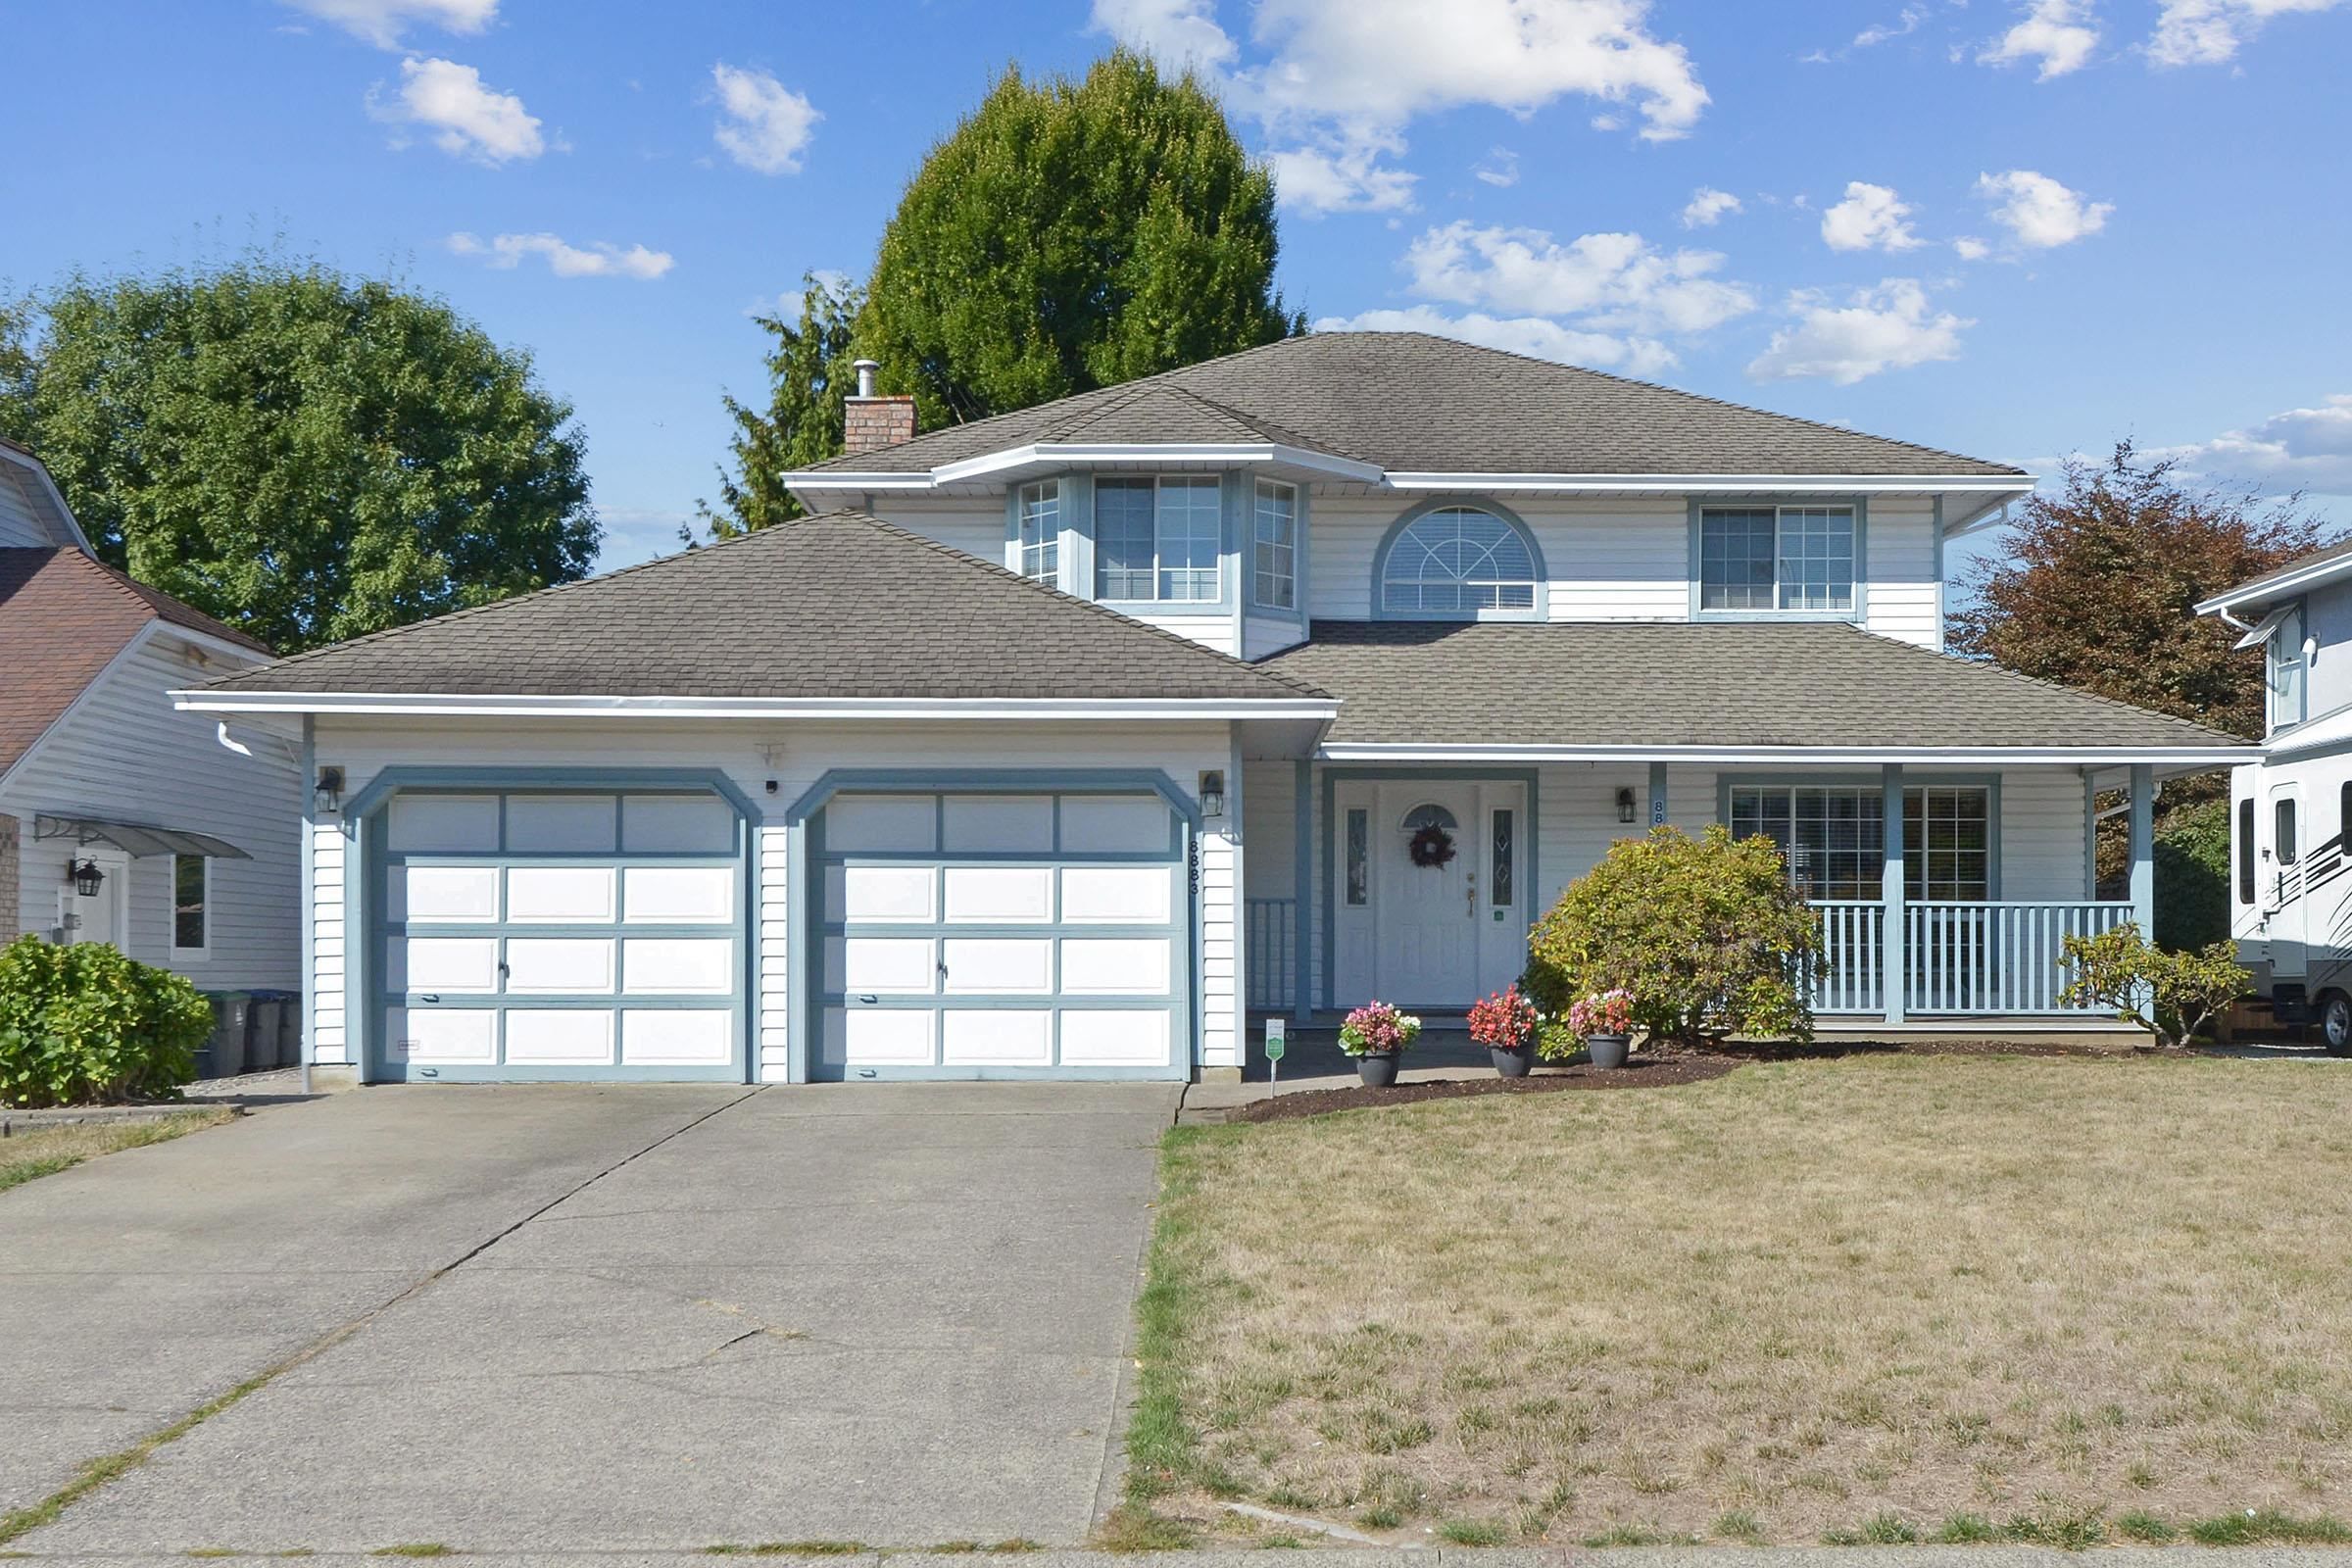 New property listed in Bear Creek Green Timbers, Surrey